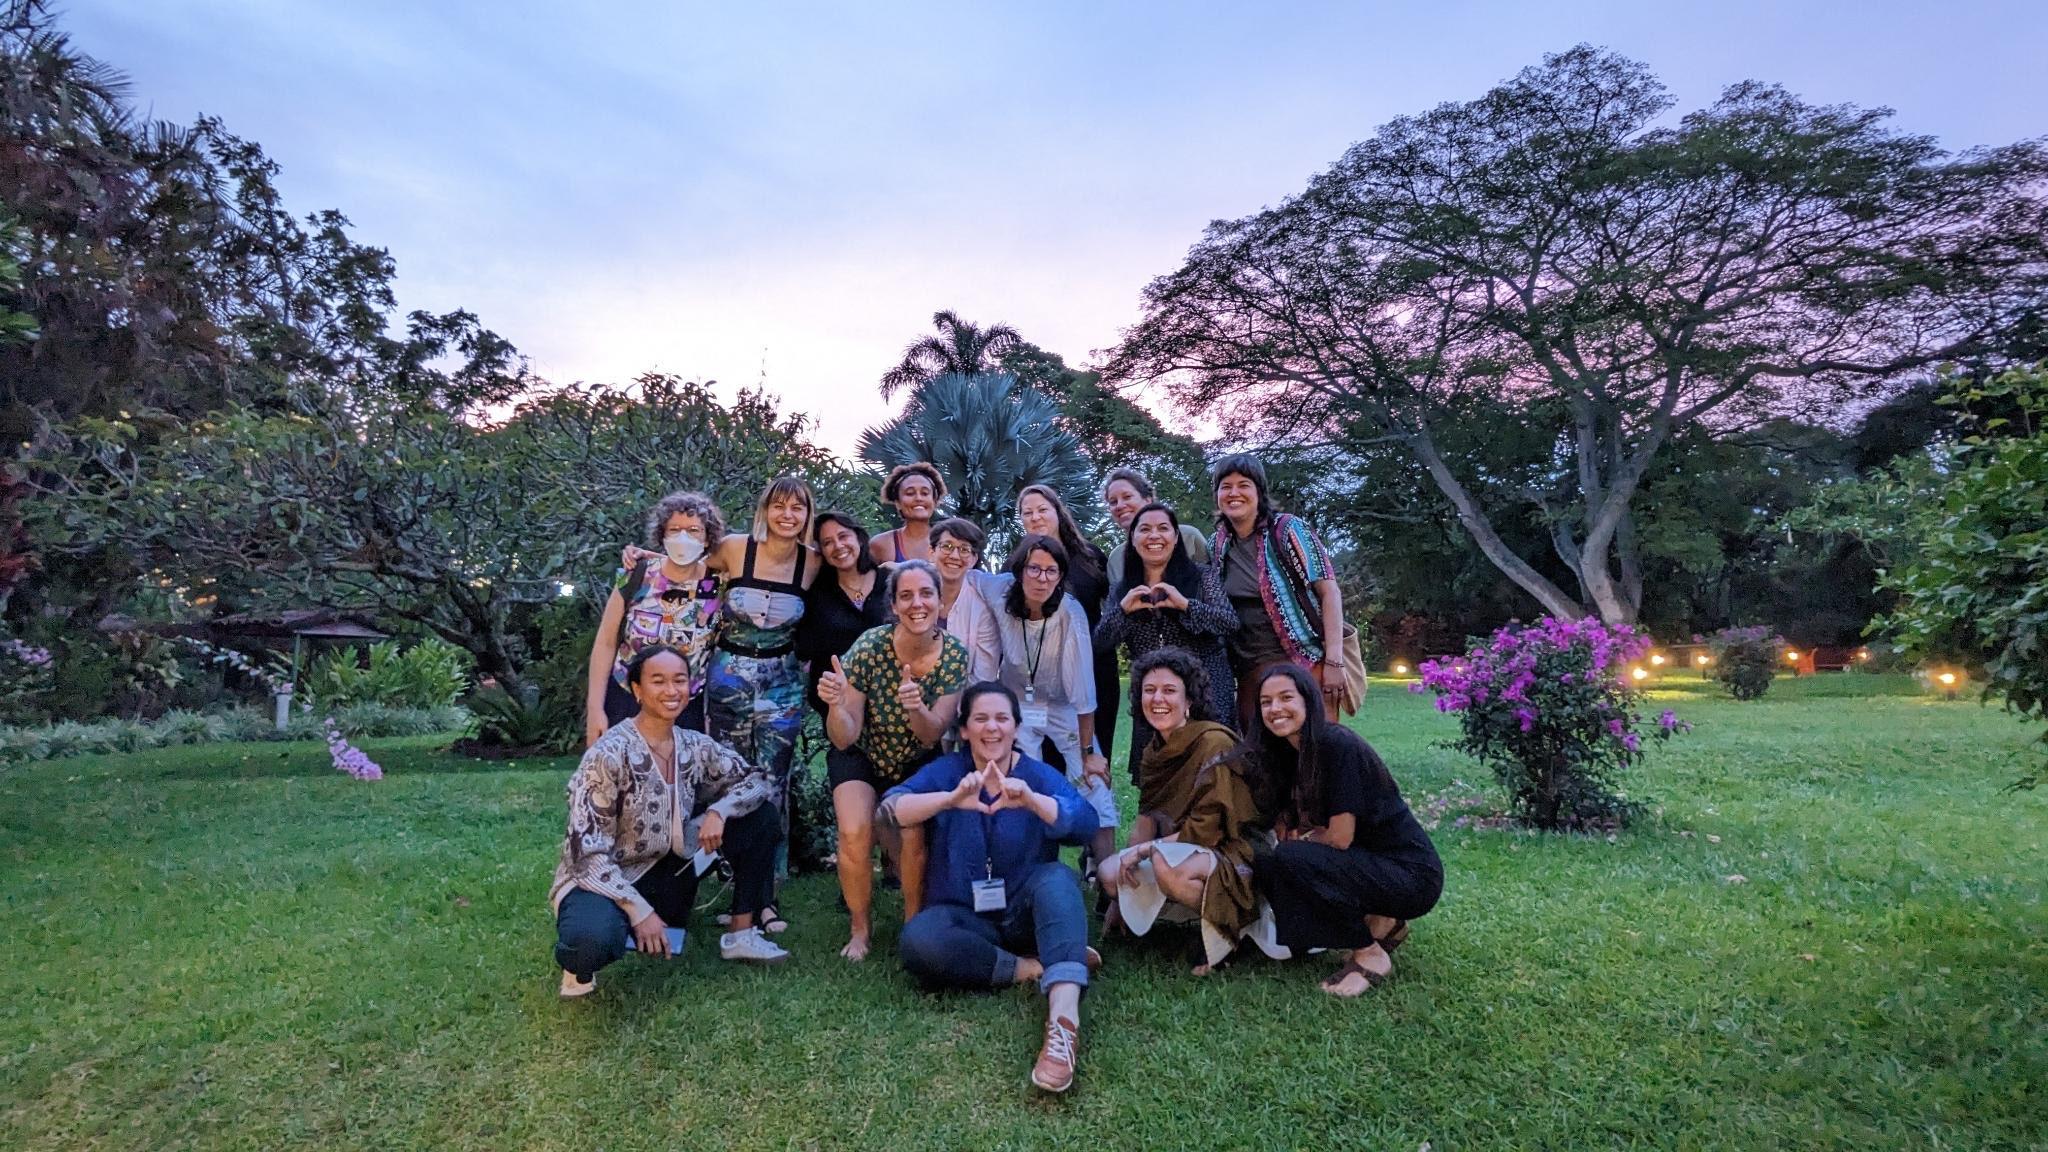 Co-facilitators from the event in Costa Rica with the sunset in the background